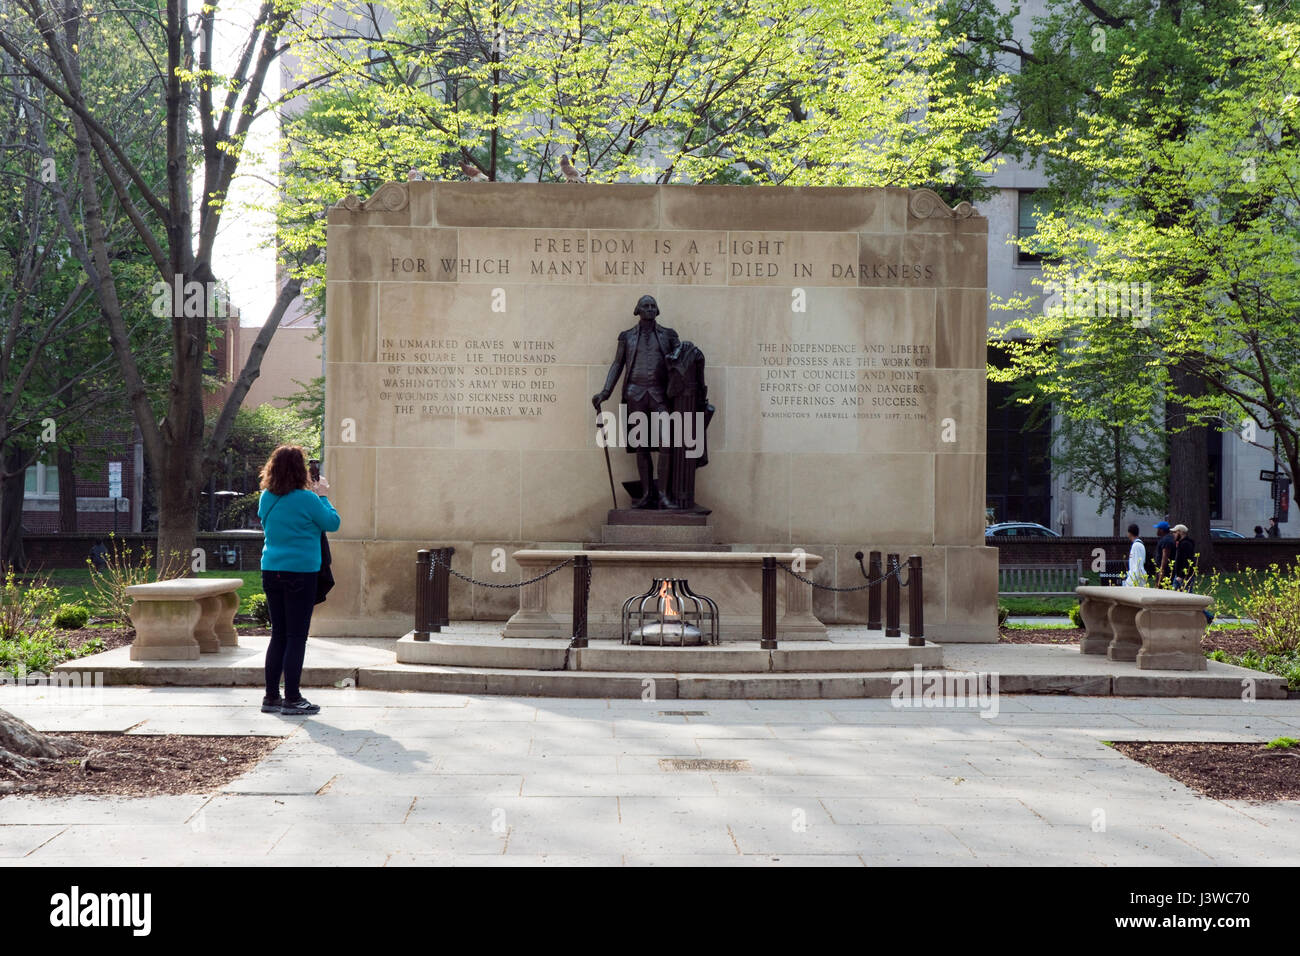 Tomb of Unknown Revolutionary War Soldier, Washington Square, Philadelphia, Pennsylvania, commemorates soldiers who died in the American Revolution. Stock Photo